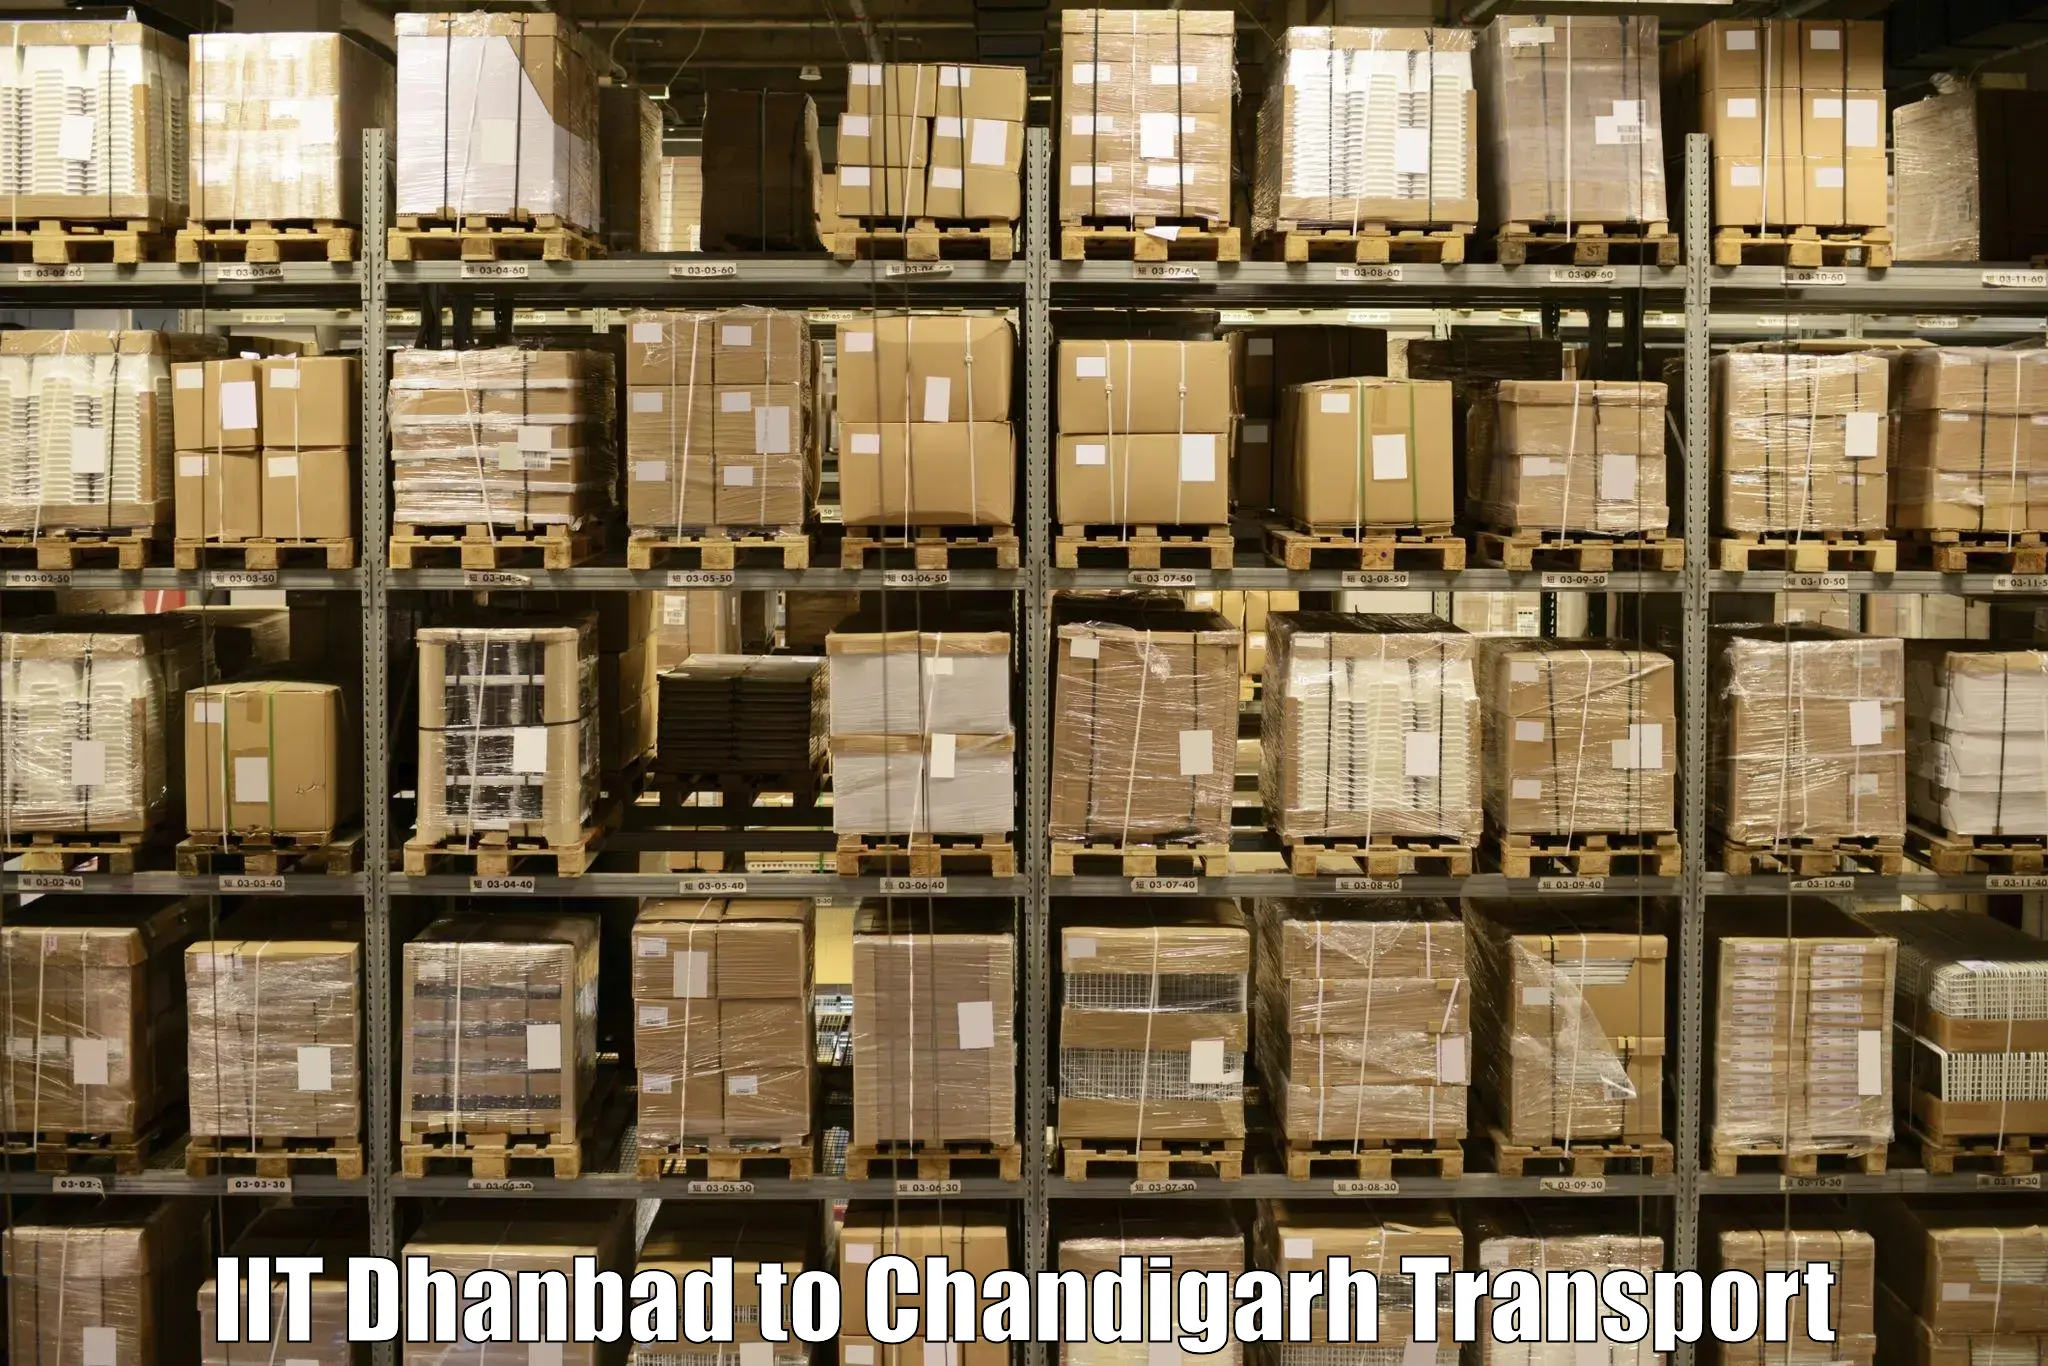 Container transport service IIT Dhanbad to Chandigarh